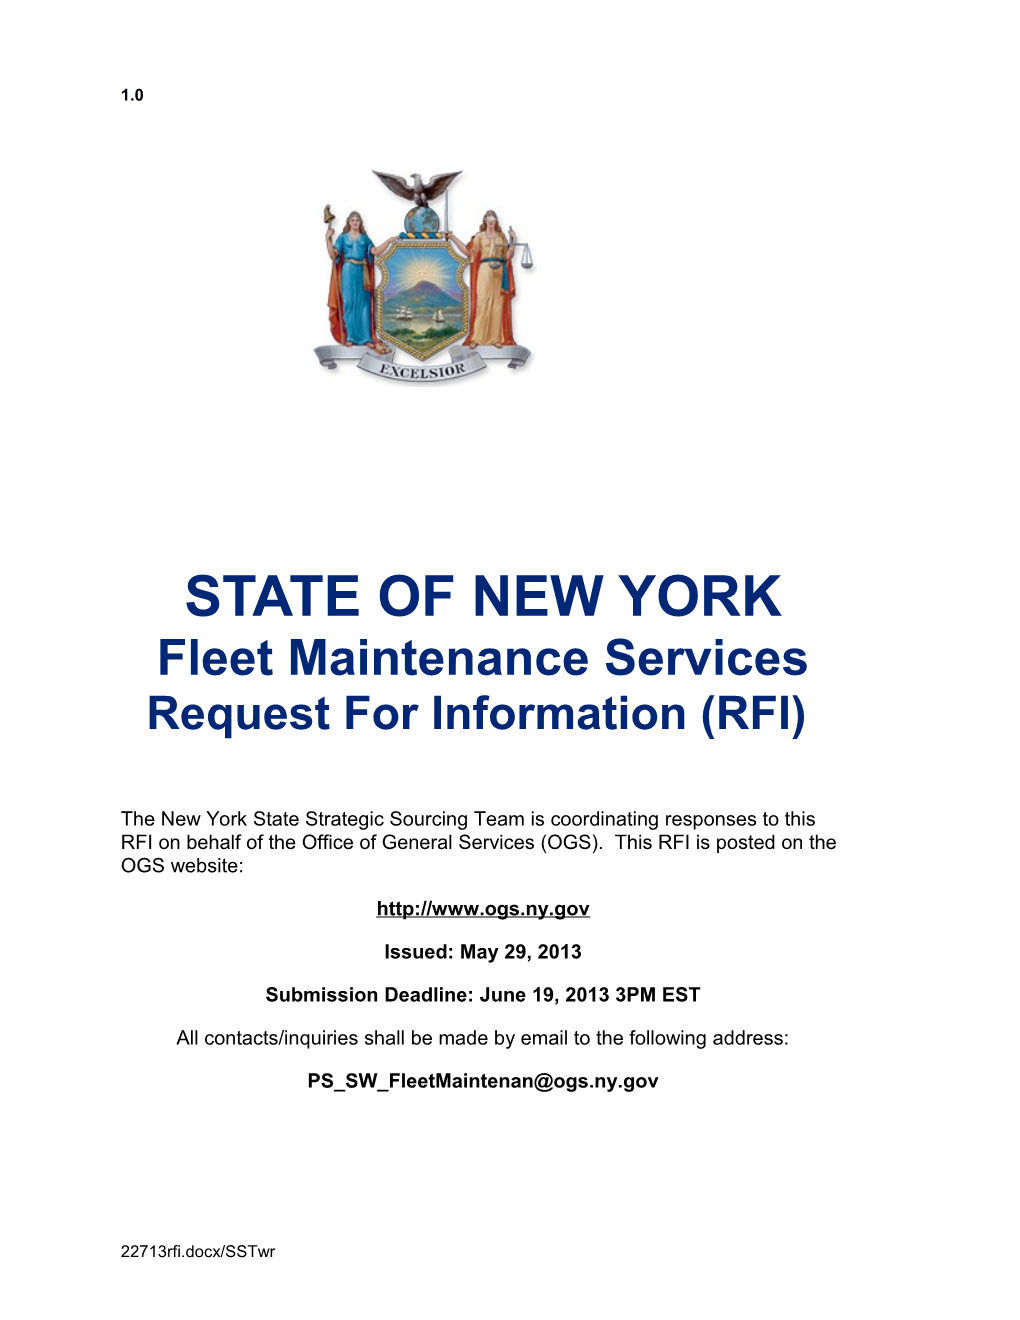 GROUP 72002-22713 Fleet Maintenance Services RFIPAGE 1